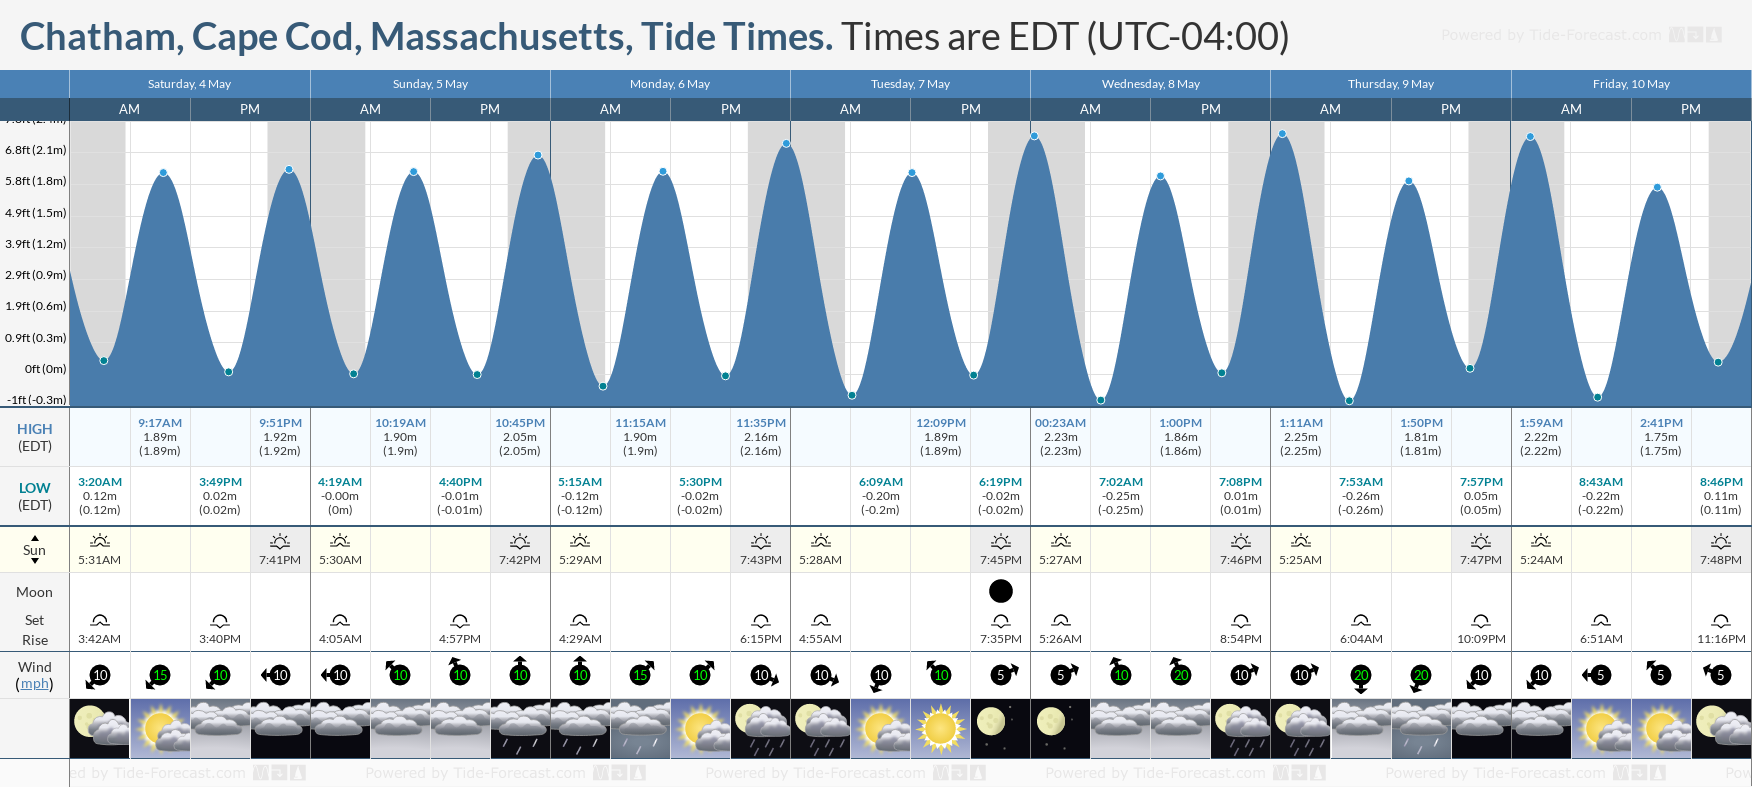 Chatham, Cape Cod, Massachusetts Tide Chart including high and low tide tide times for the next 7 days